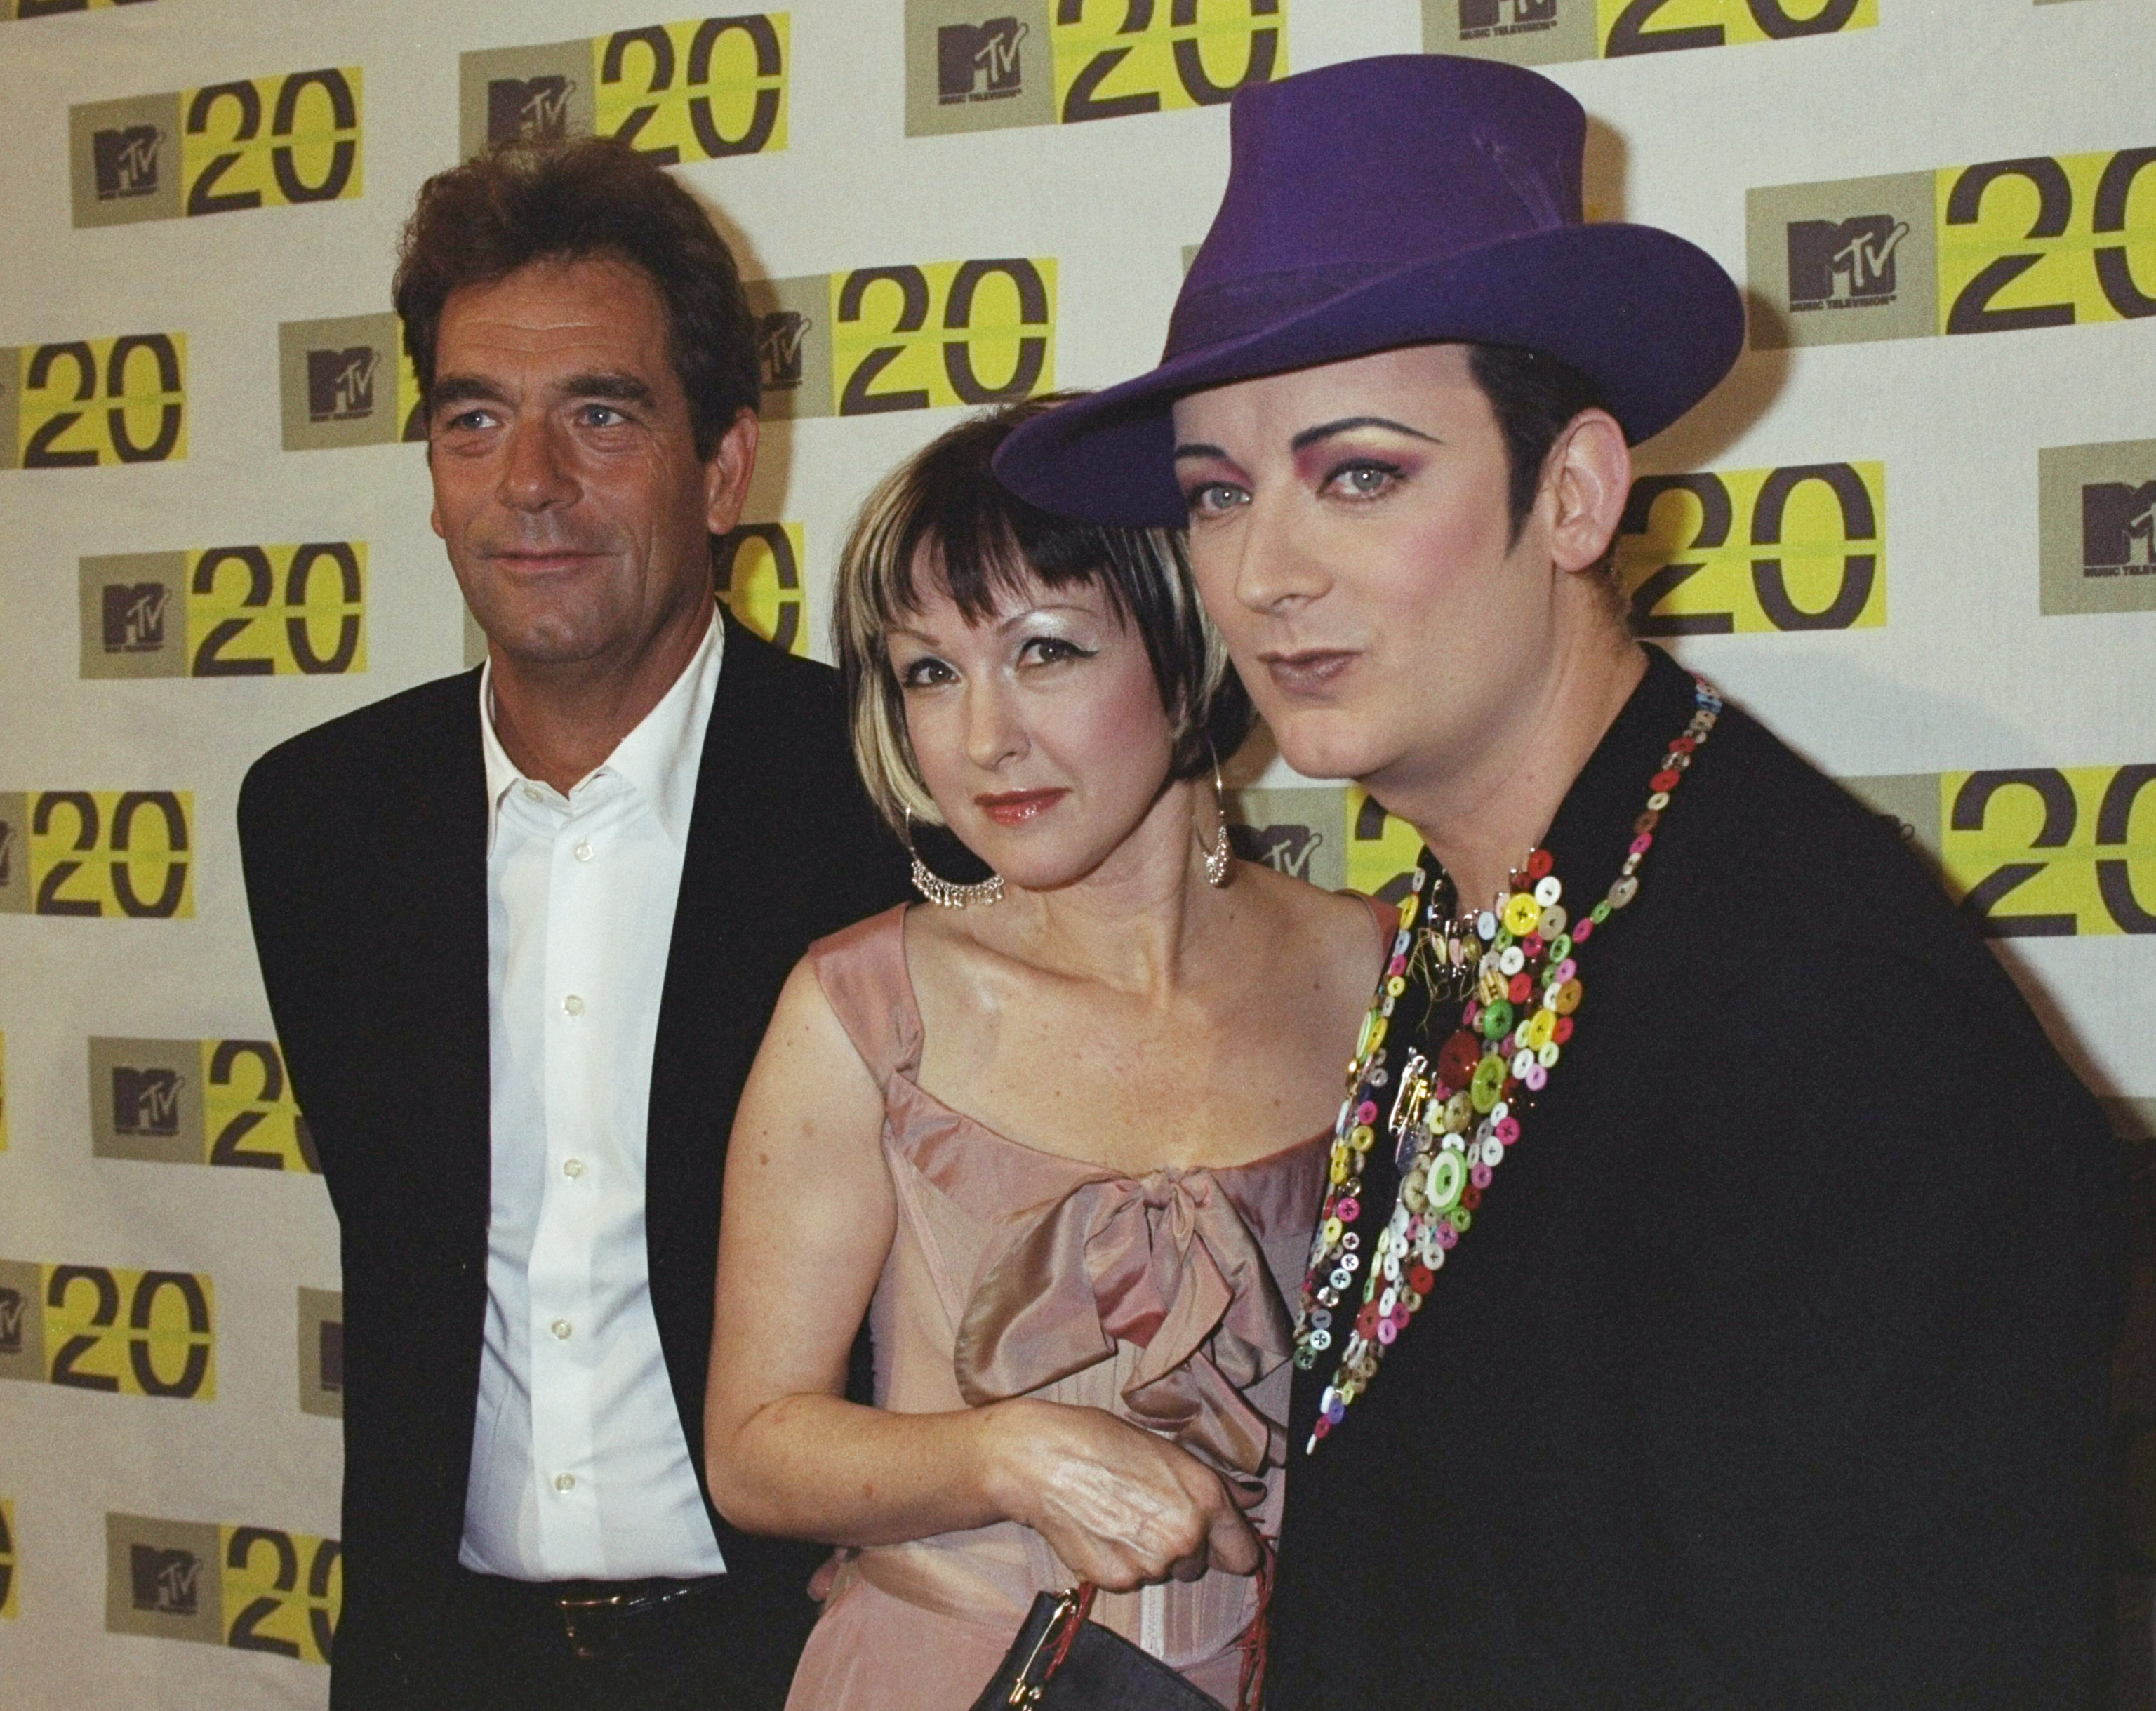 The singer, Cindy Lauper and Boy George during MTV's 20th anniversary celebration on January 1, 2001. | Source: Getty Images